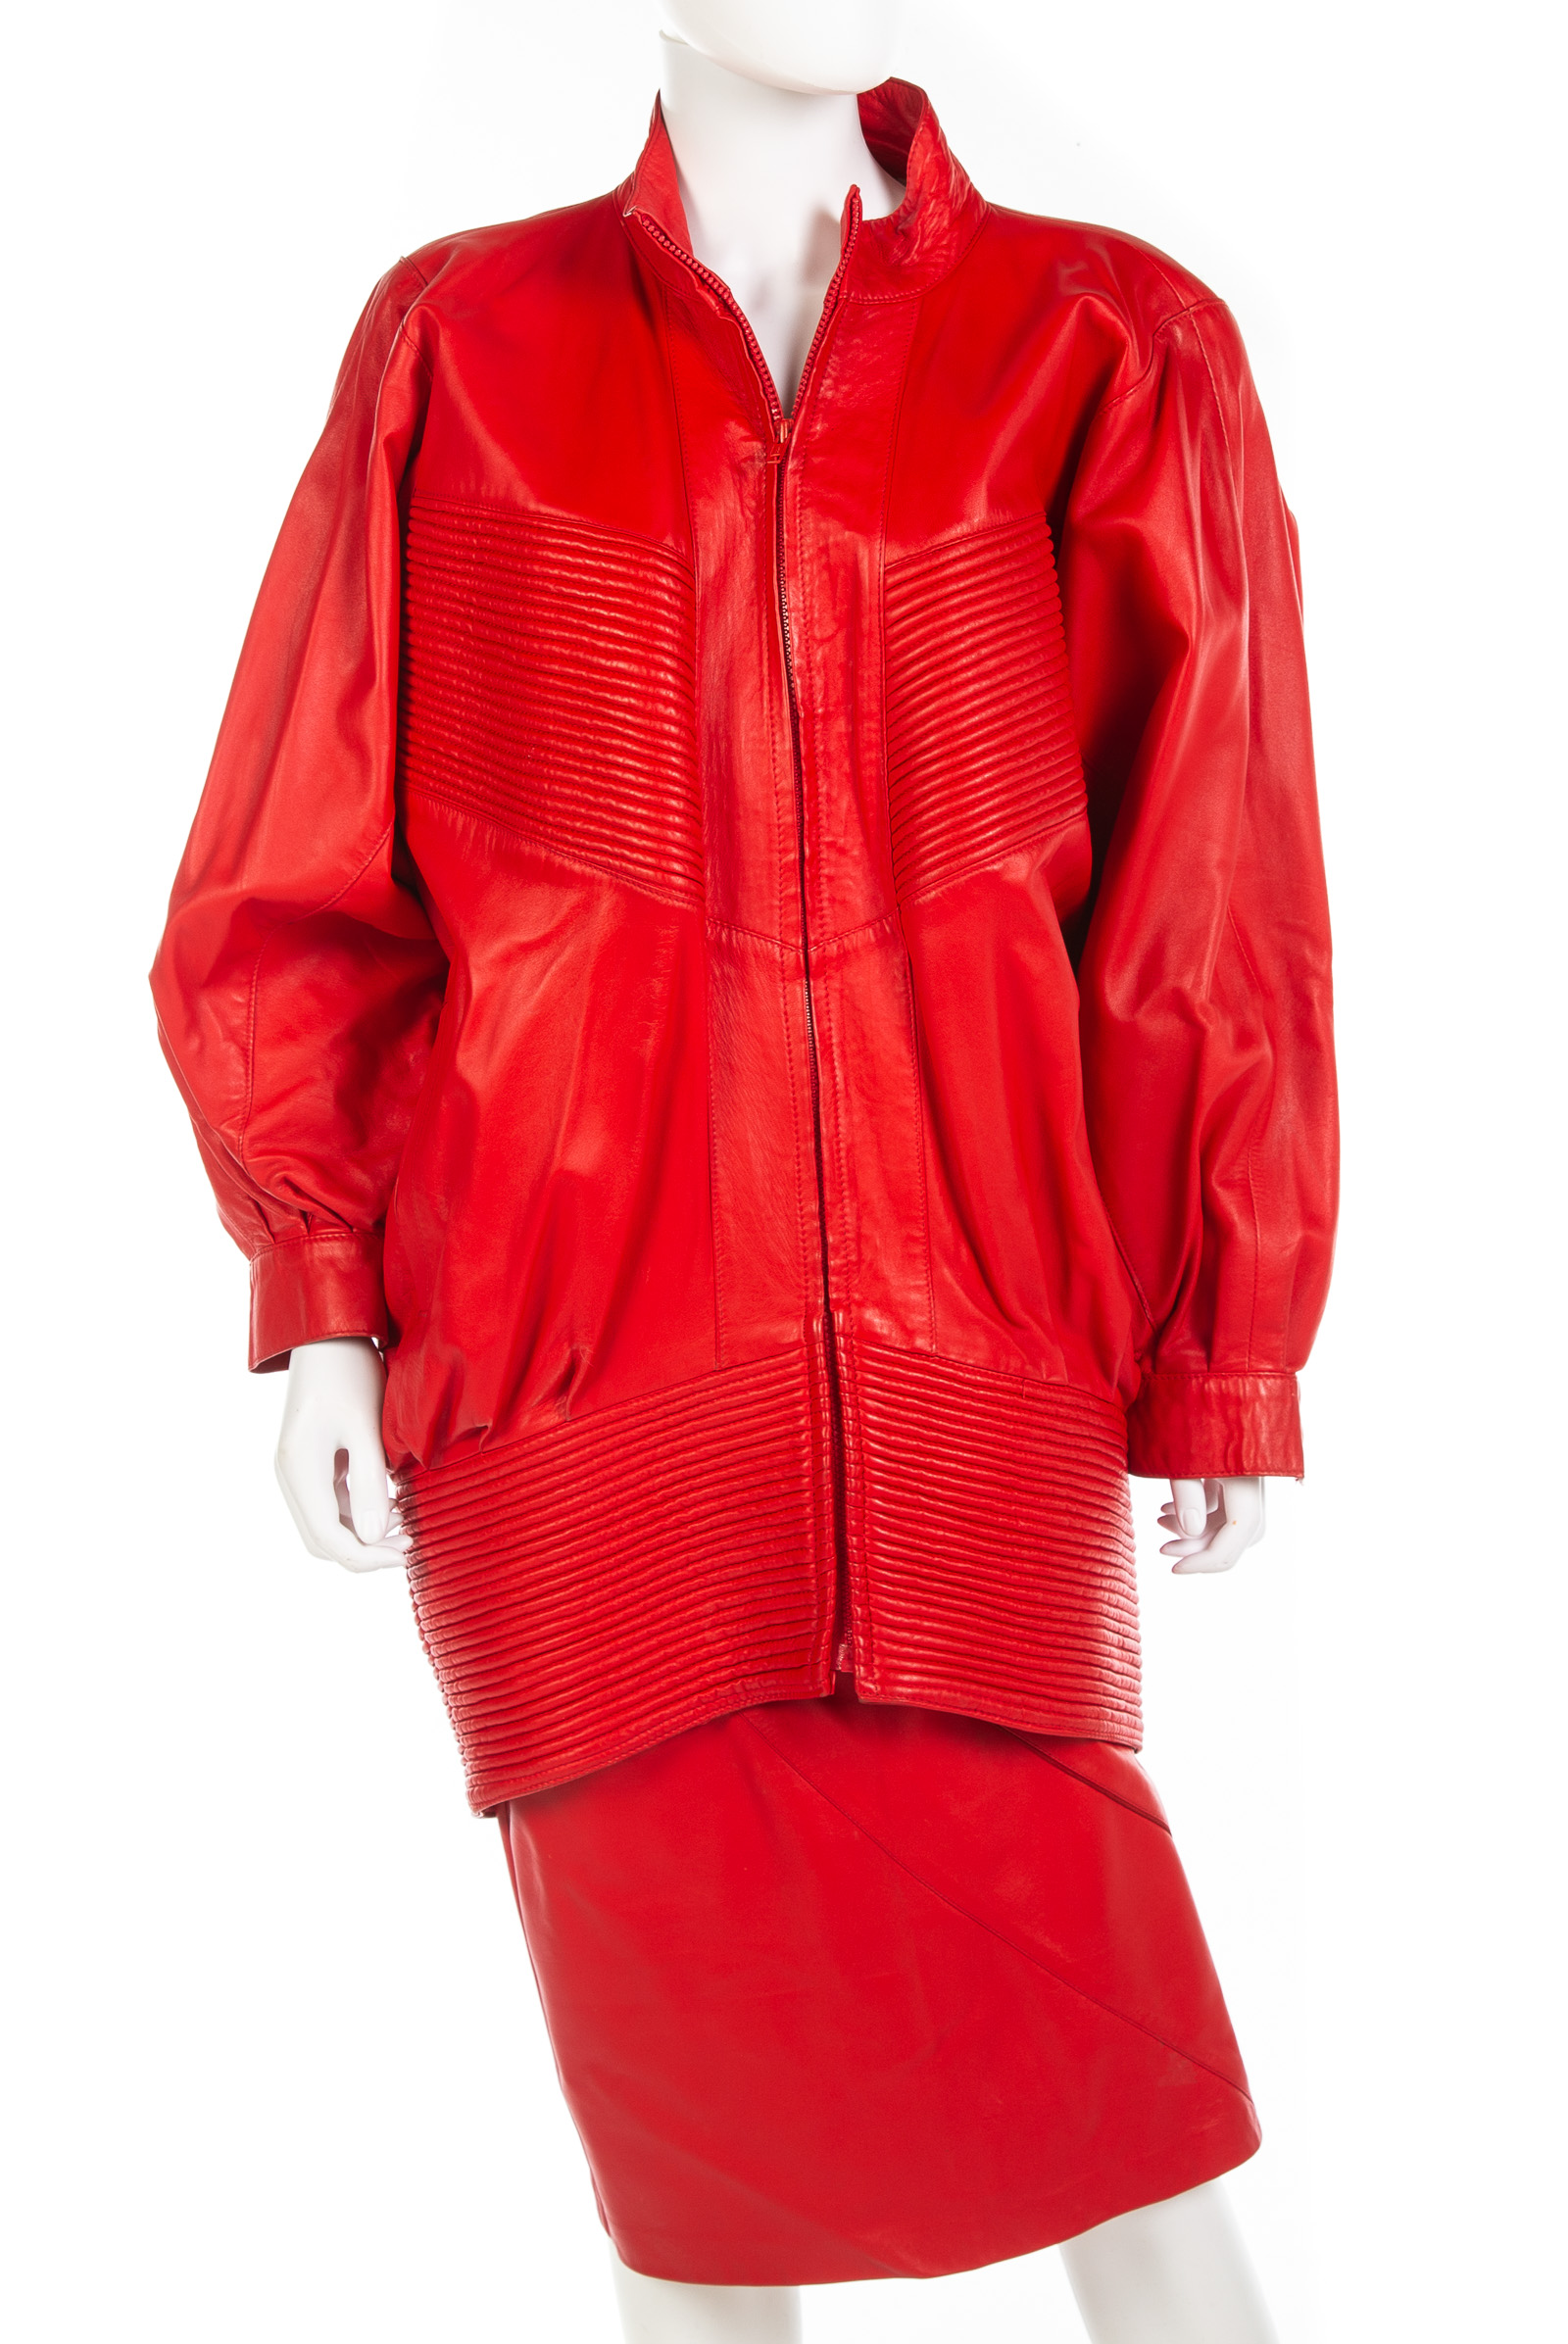 COLLECTION OF RED LEATHER CLOTHING